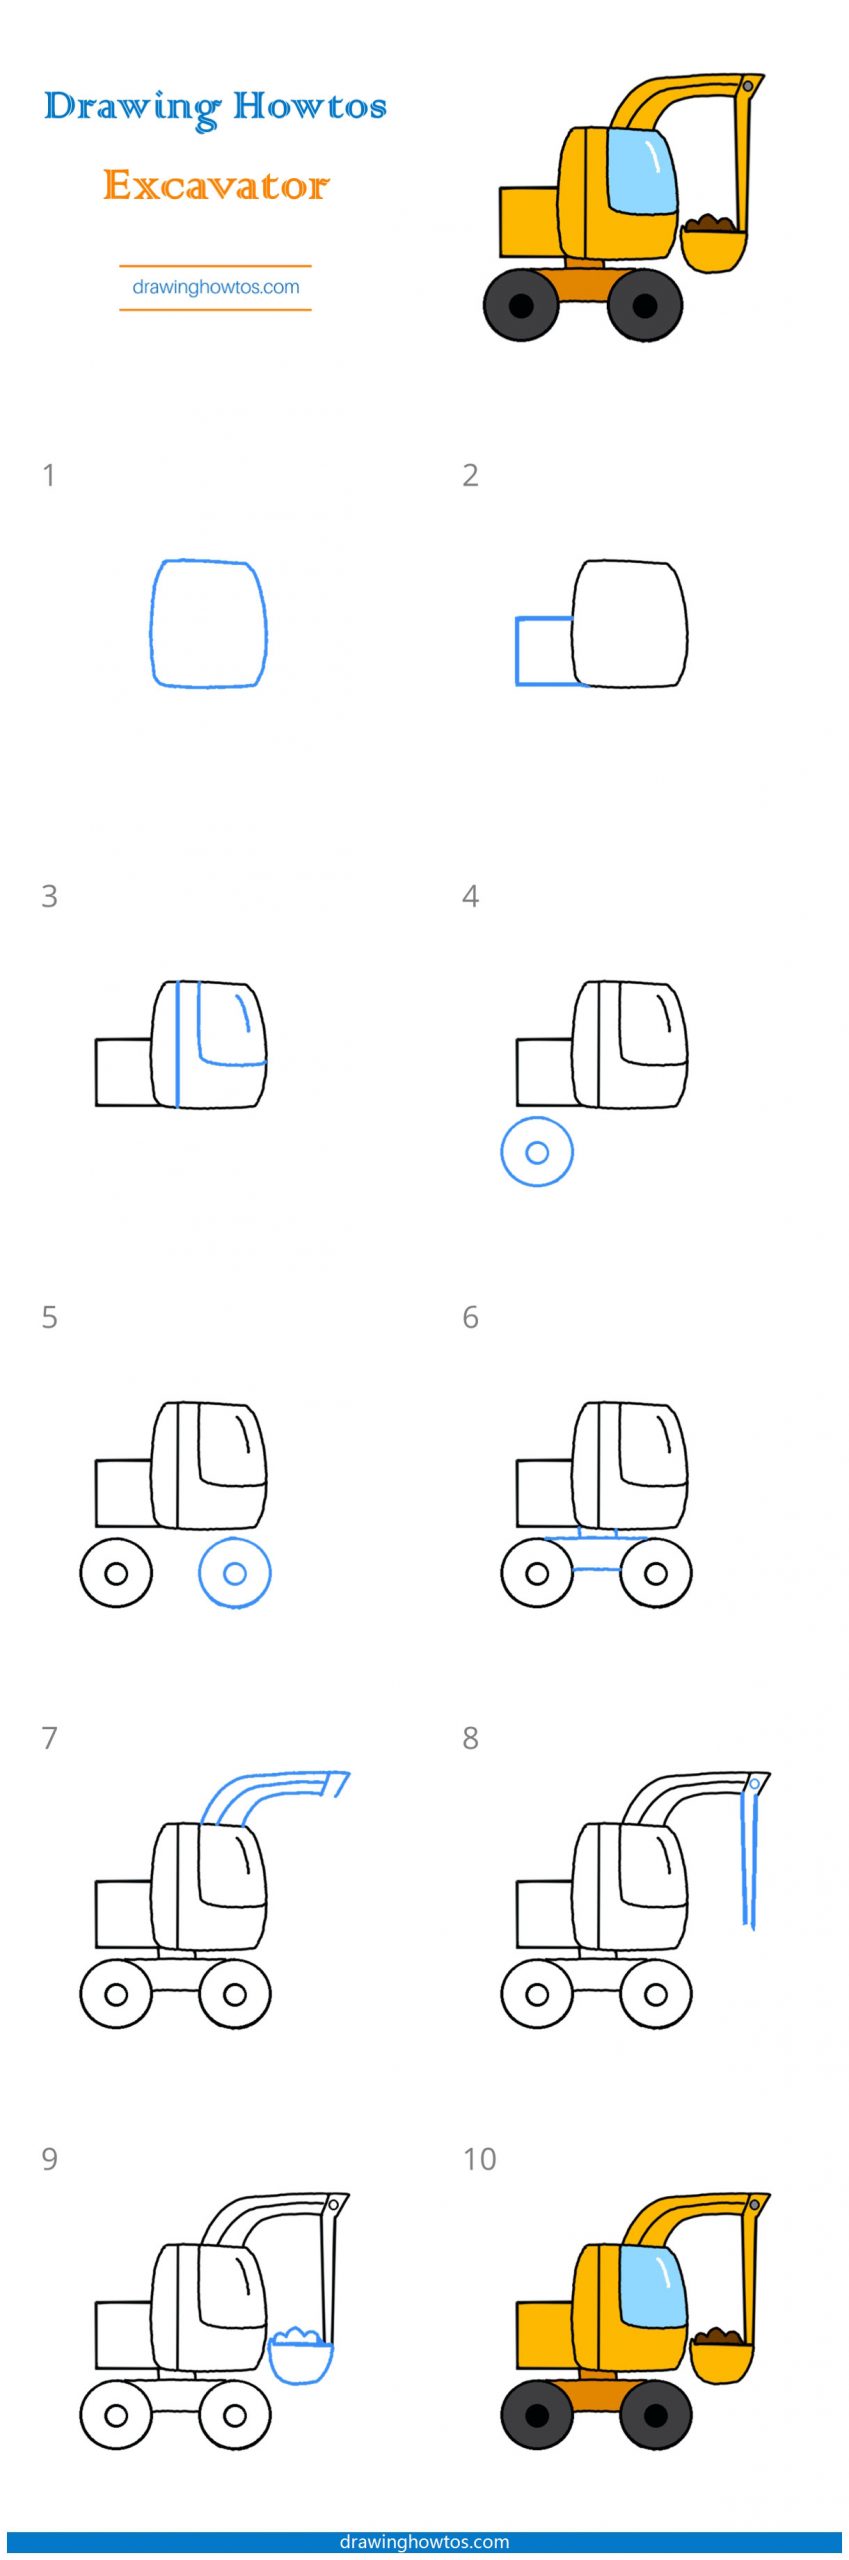 How to Draw an Excavator Step by Step